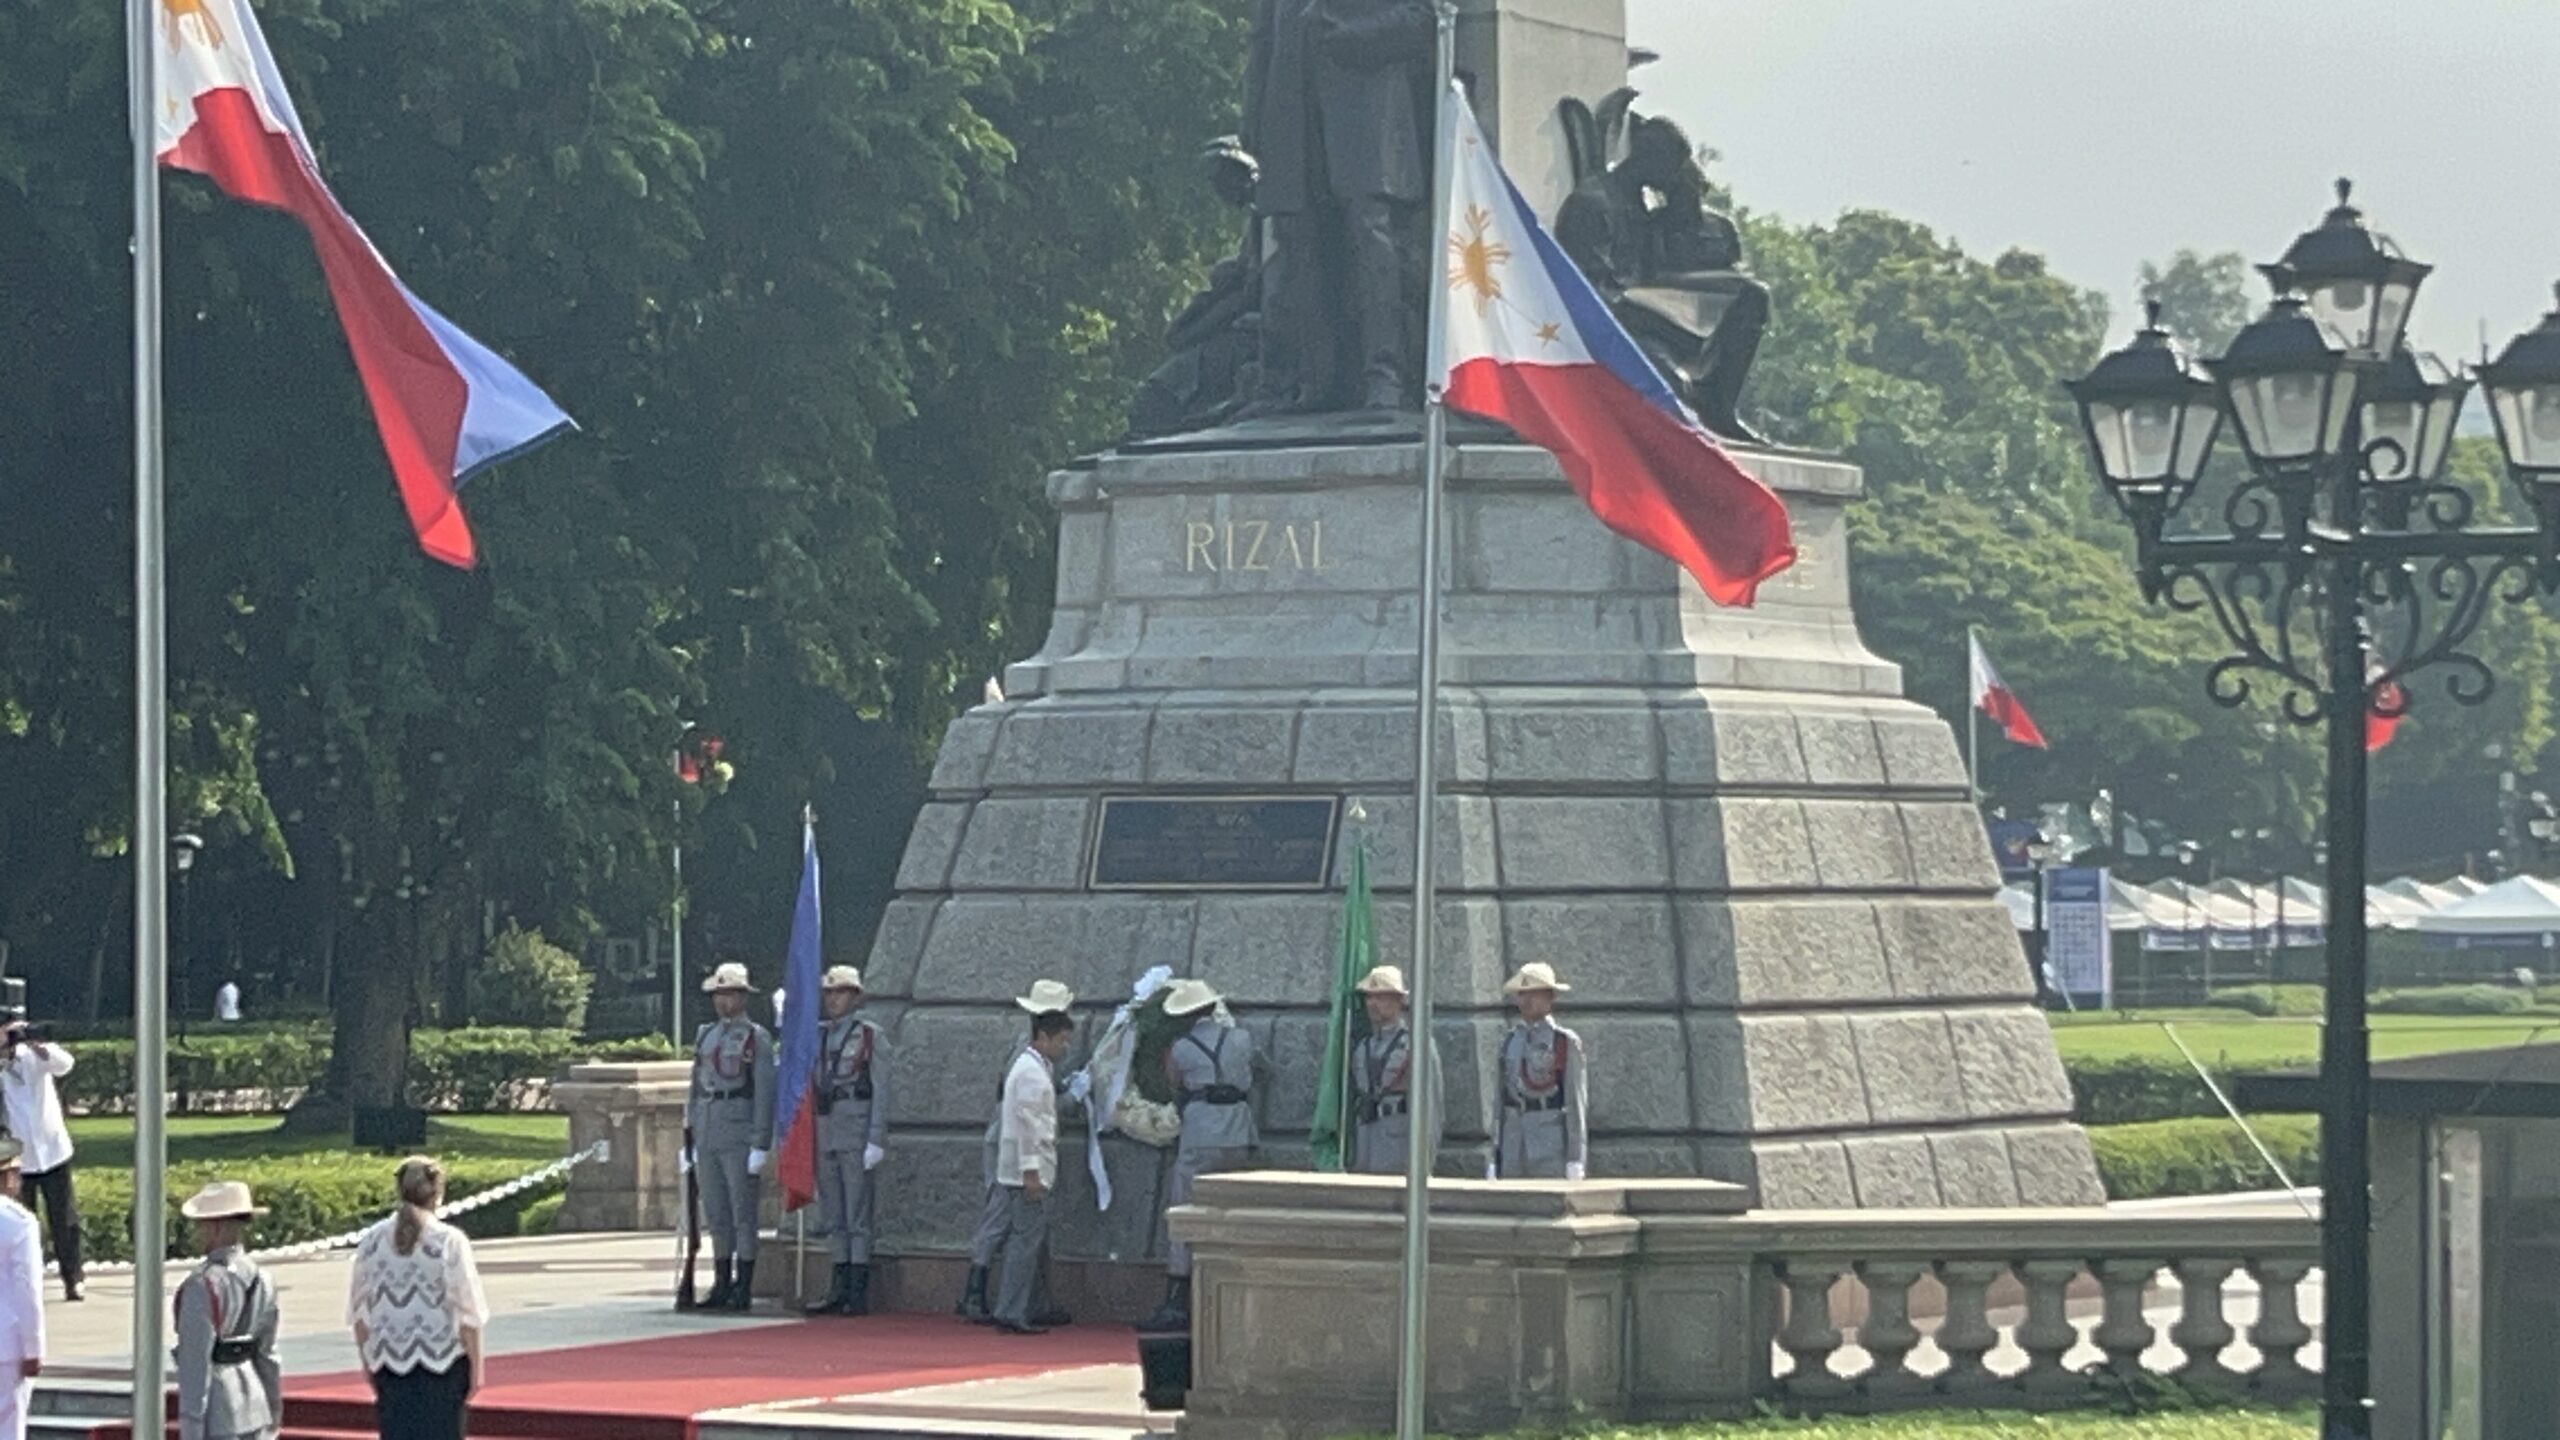 Marcos at 126th Insdpendence Day rites at Luneta